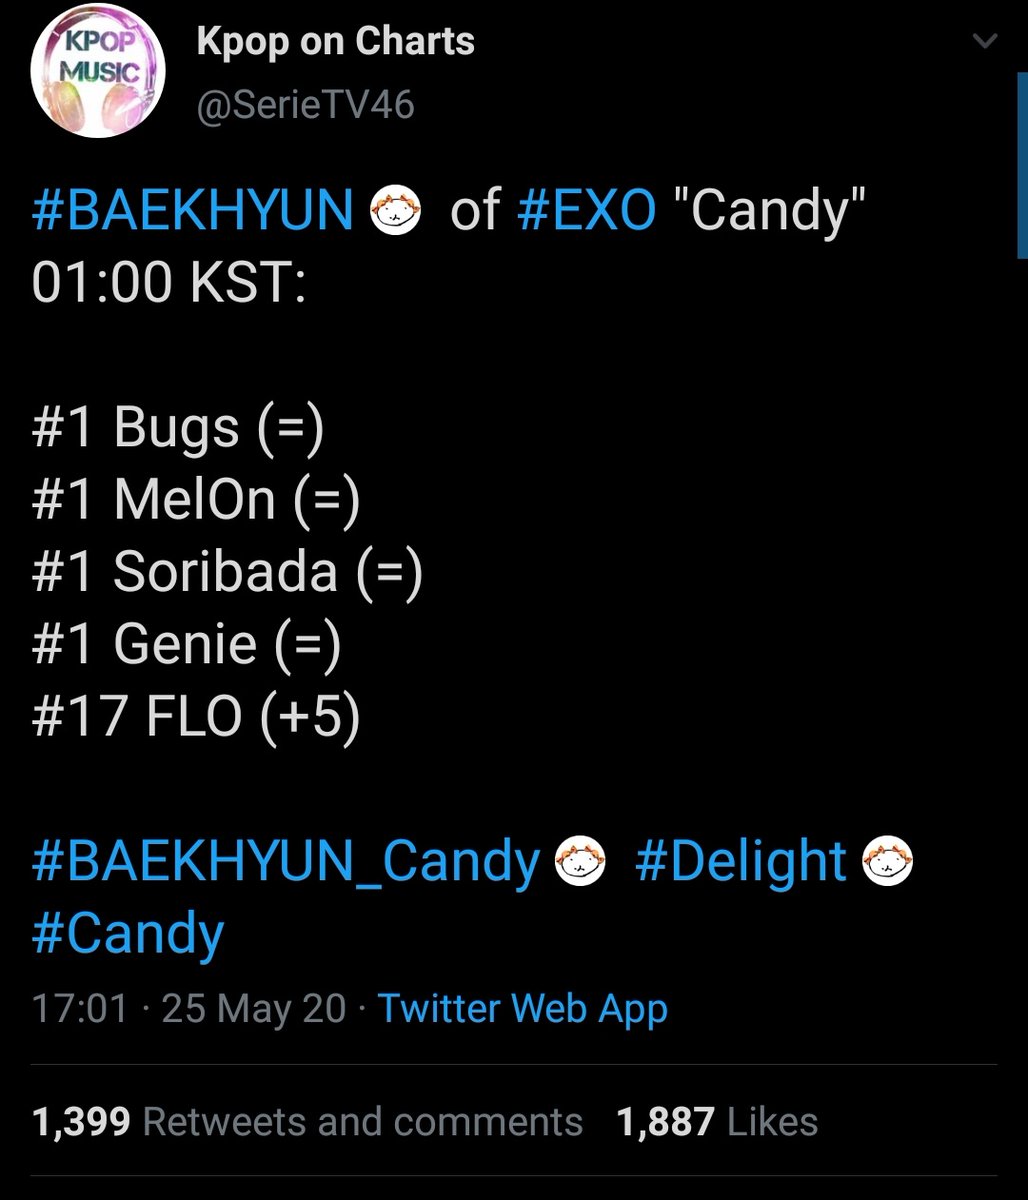 Candy reached 1 in all kcharts ( except Flo which is a 24h format) Baekhyun achieved an all kill on melon and he is the only and 1st soloist in 2020 to get it and 2nd artist.All delights tracks reached top10 at melon  what a sight.